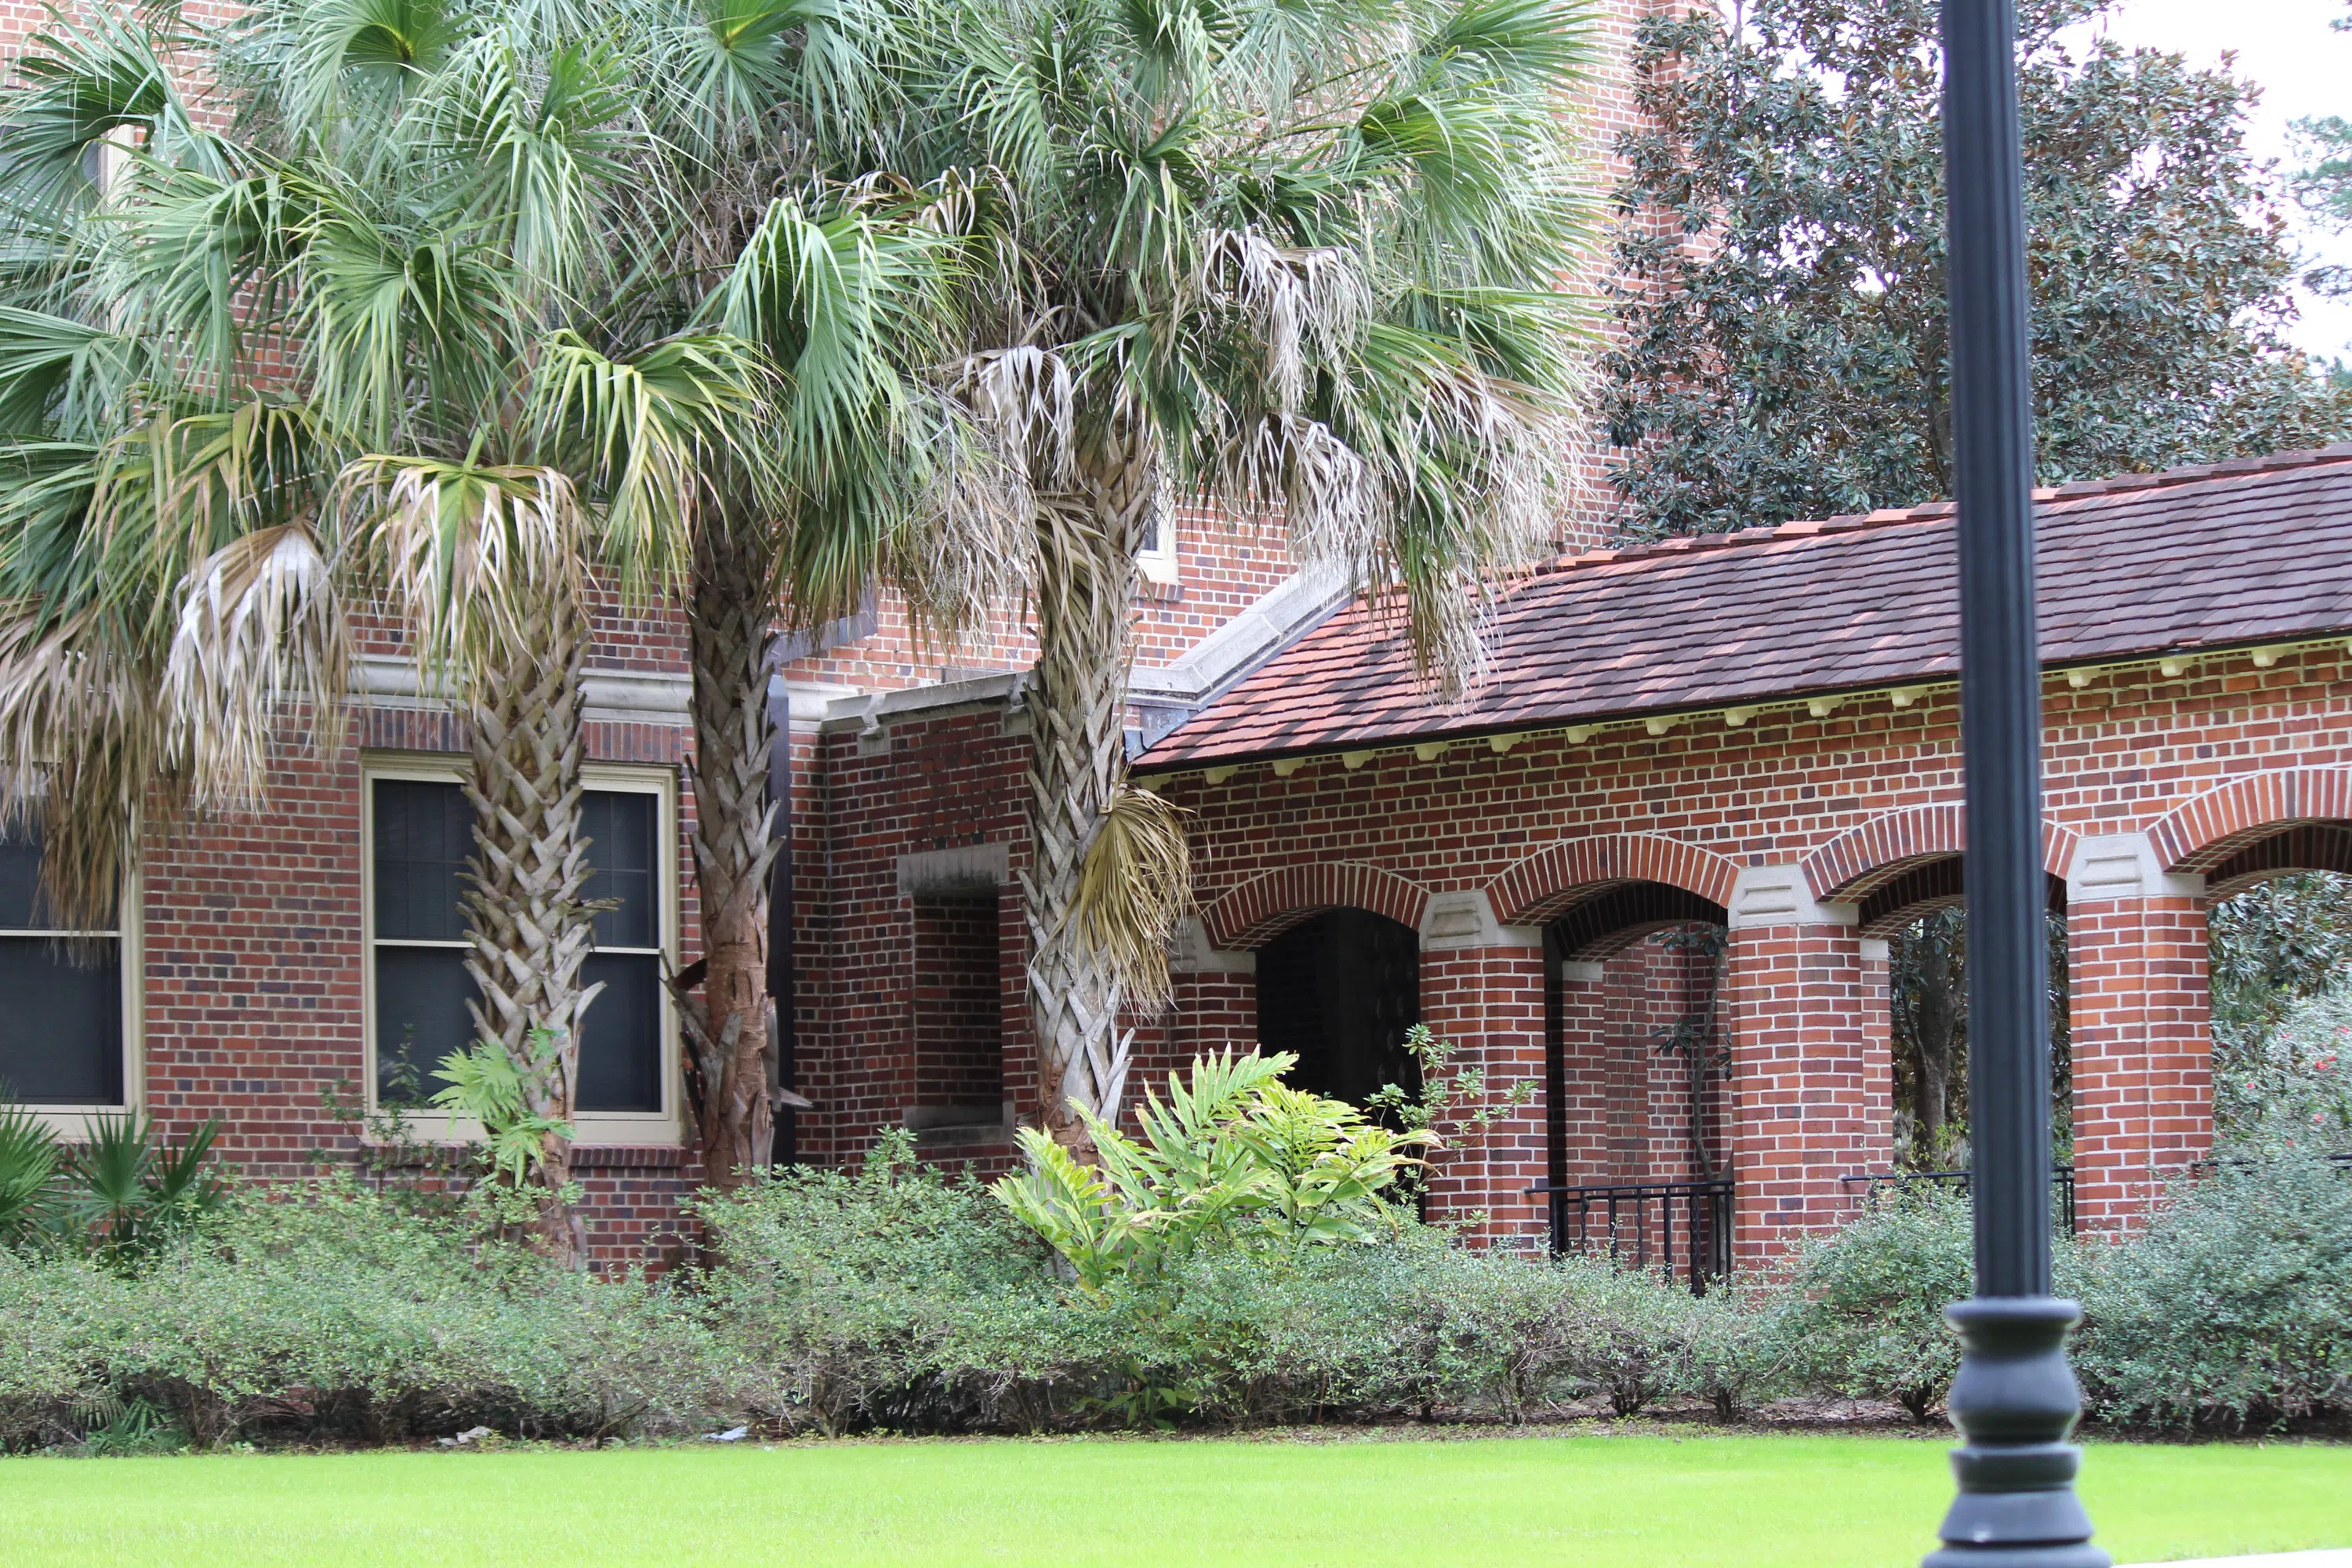 An exterior view of a historic renovated hall with a palm tree